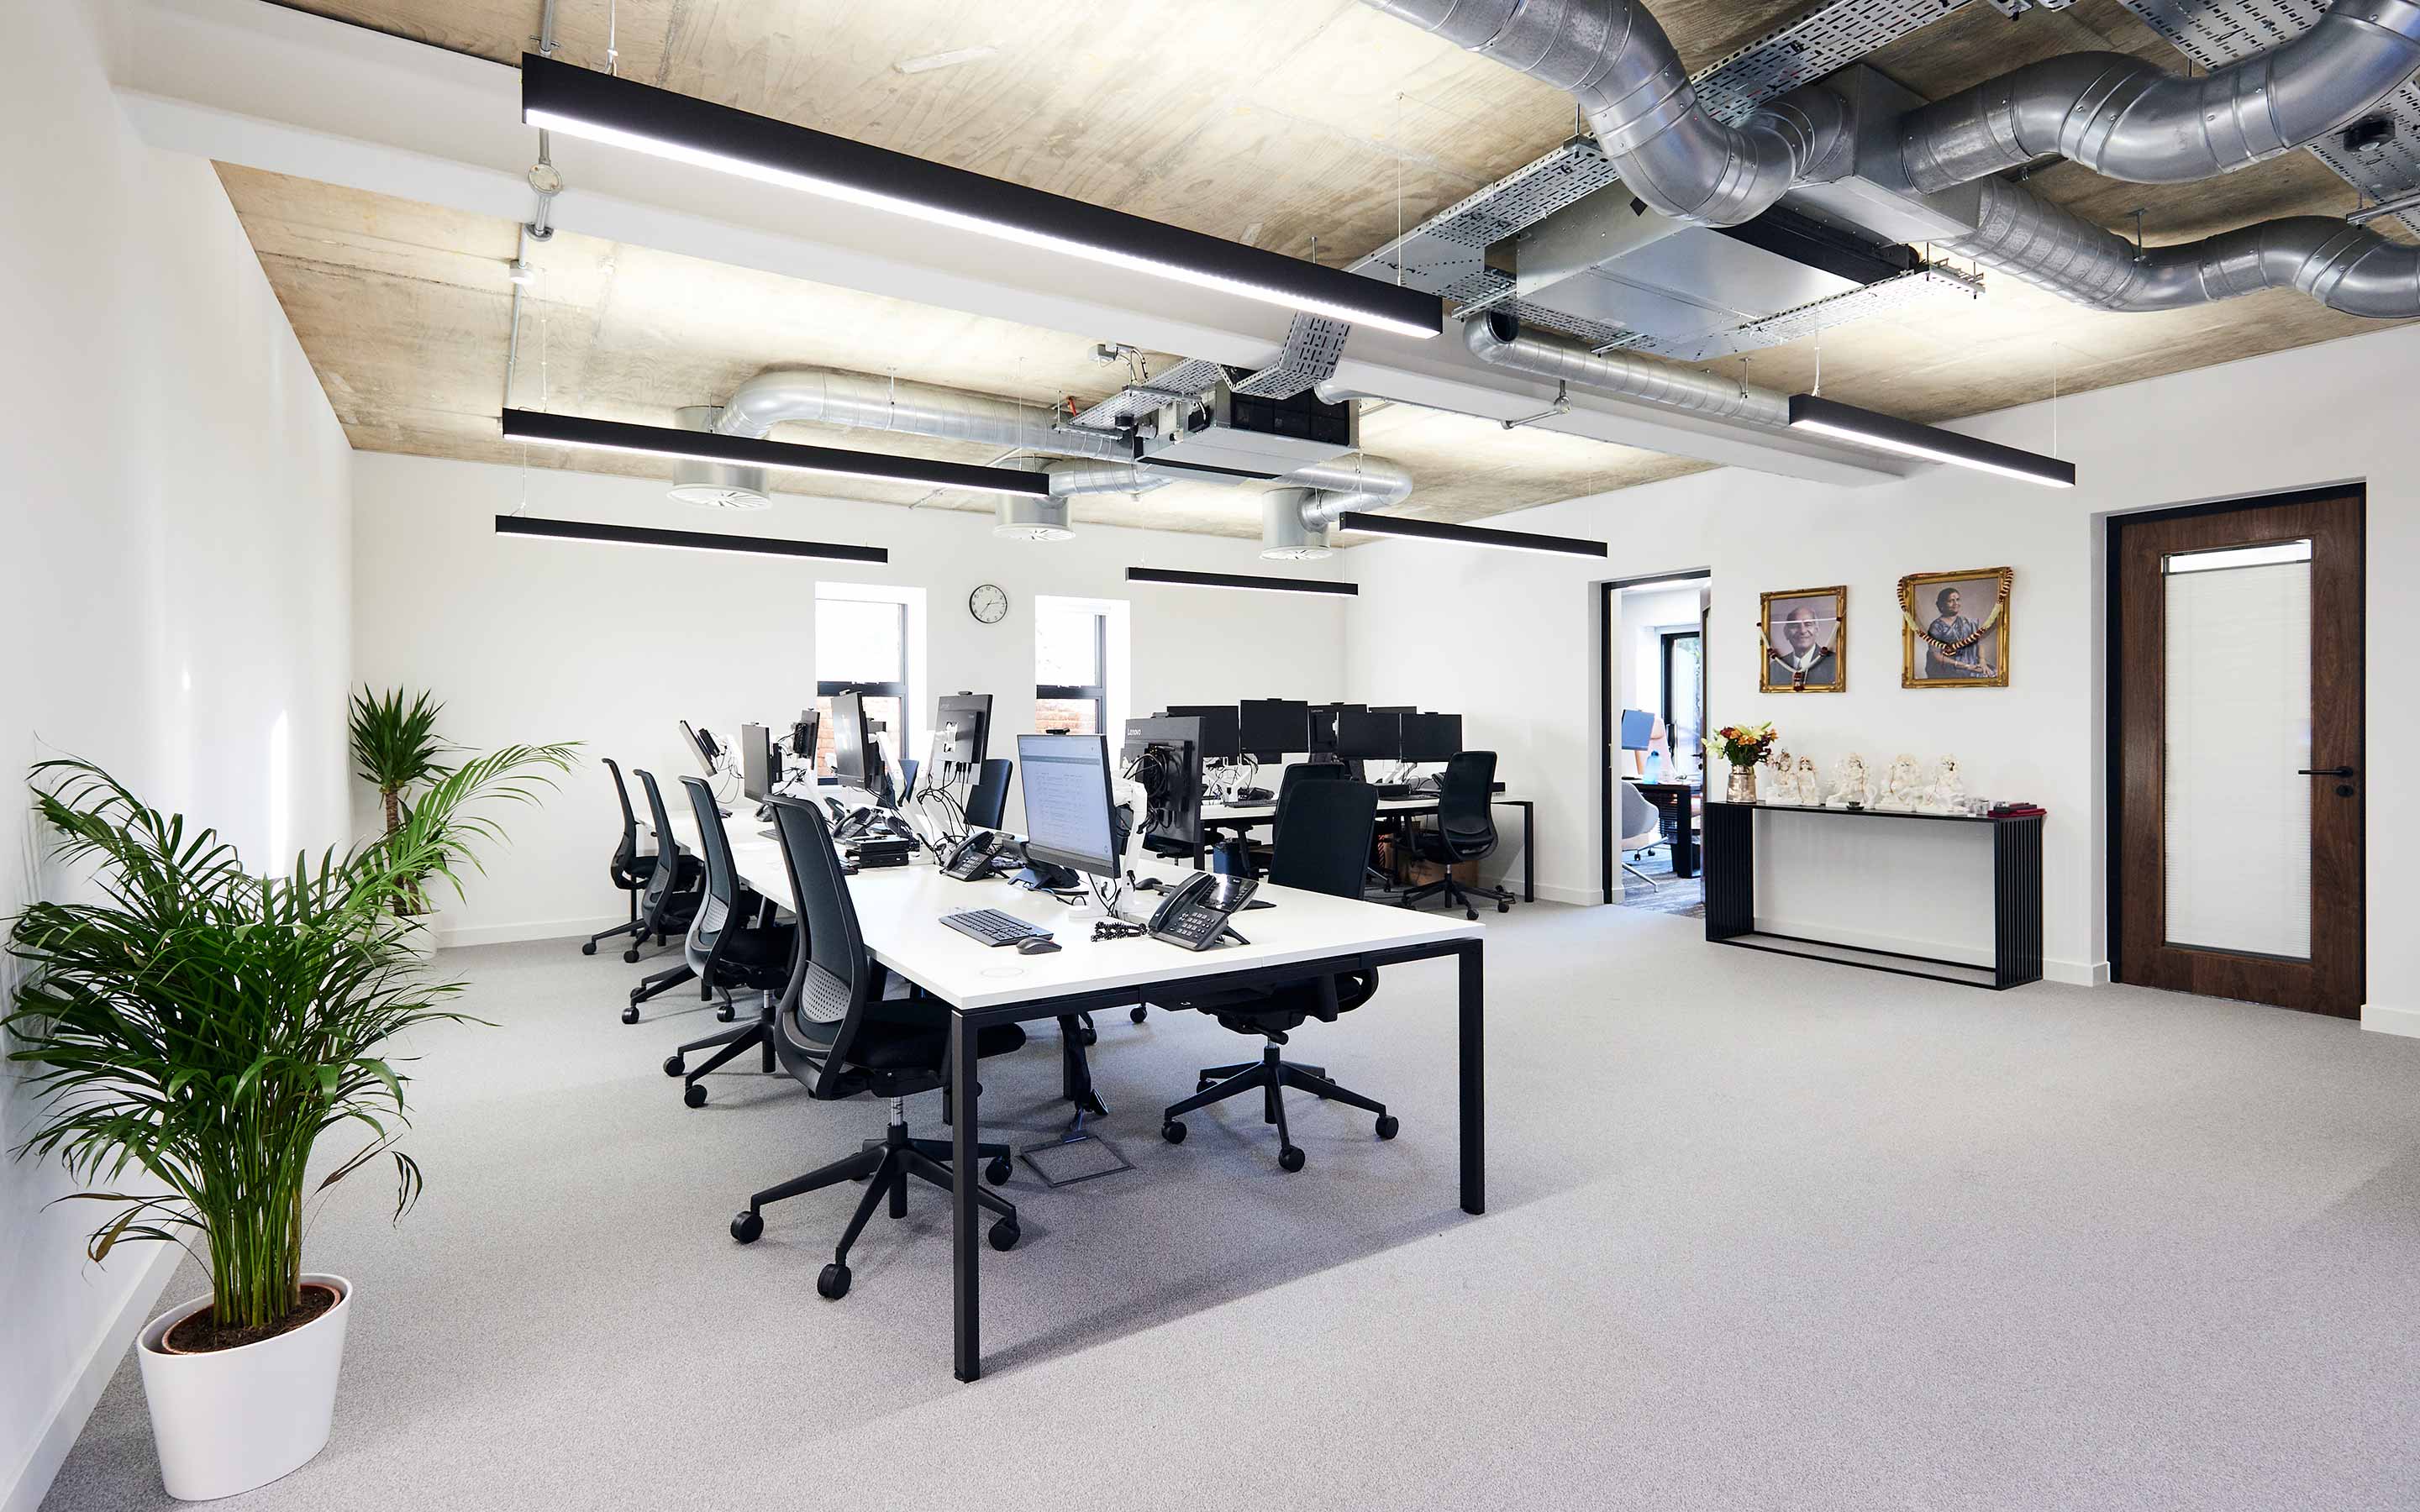 A spacious office with desks and computers, showcasing modern workplace design in a large room with exposed mechanical and electrical services and a bright aesthetic